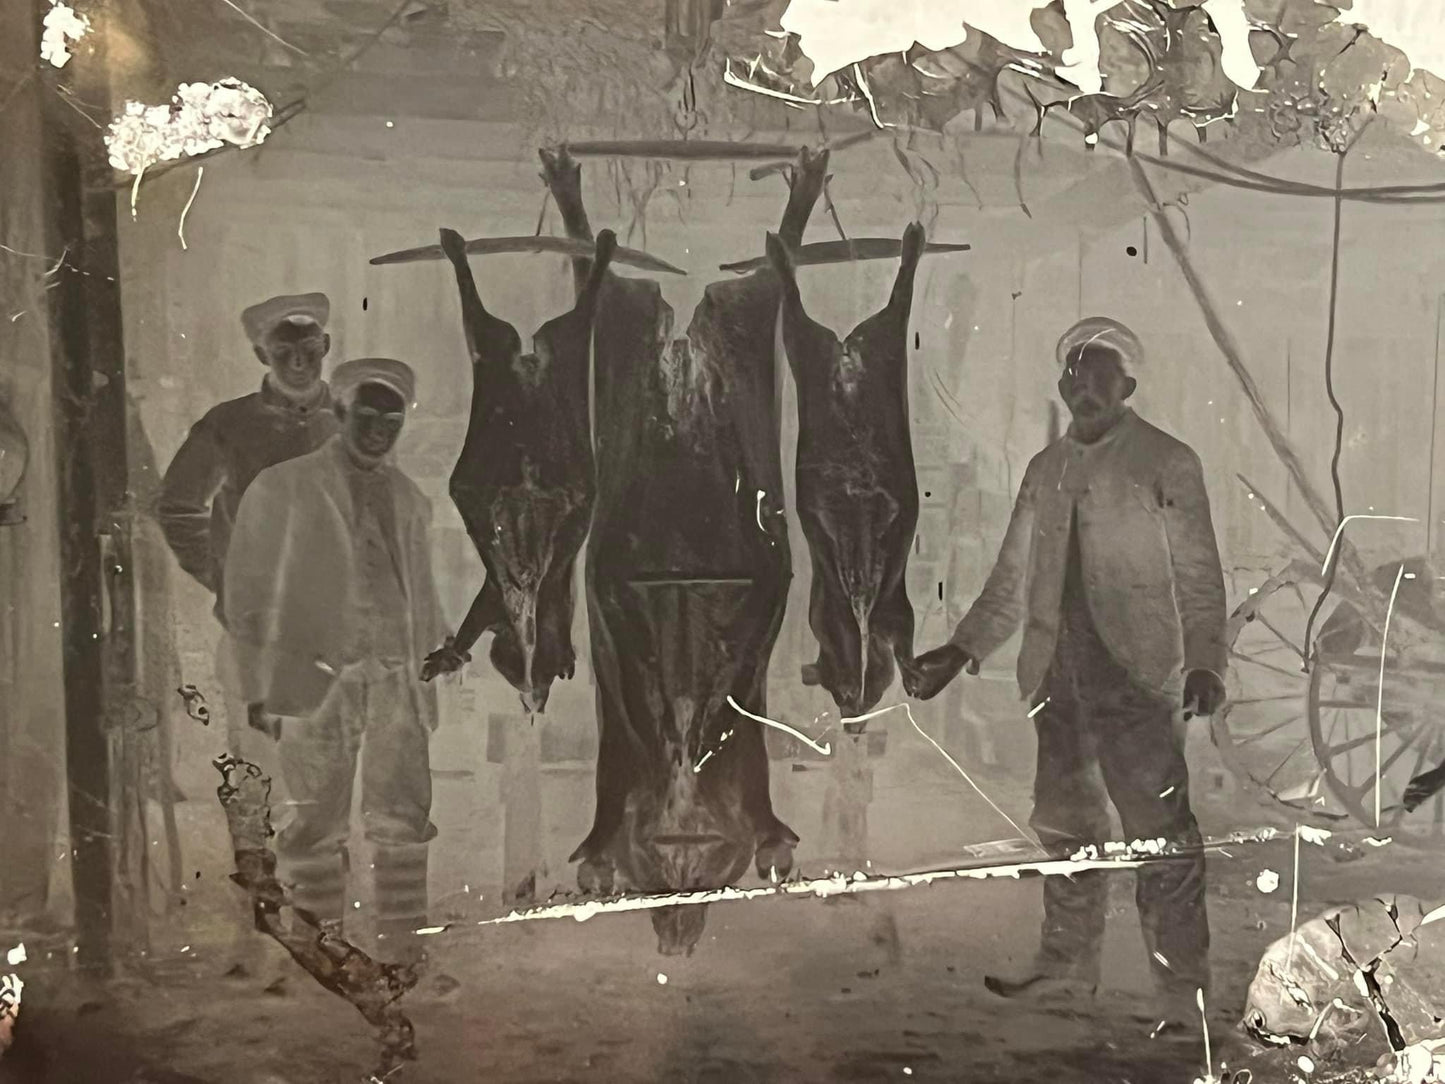 Antique photo 1910-1920

Glass negatives turn of the century photography hog processing farm life